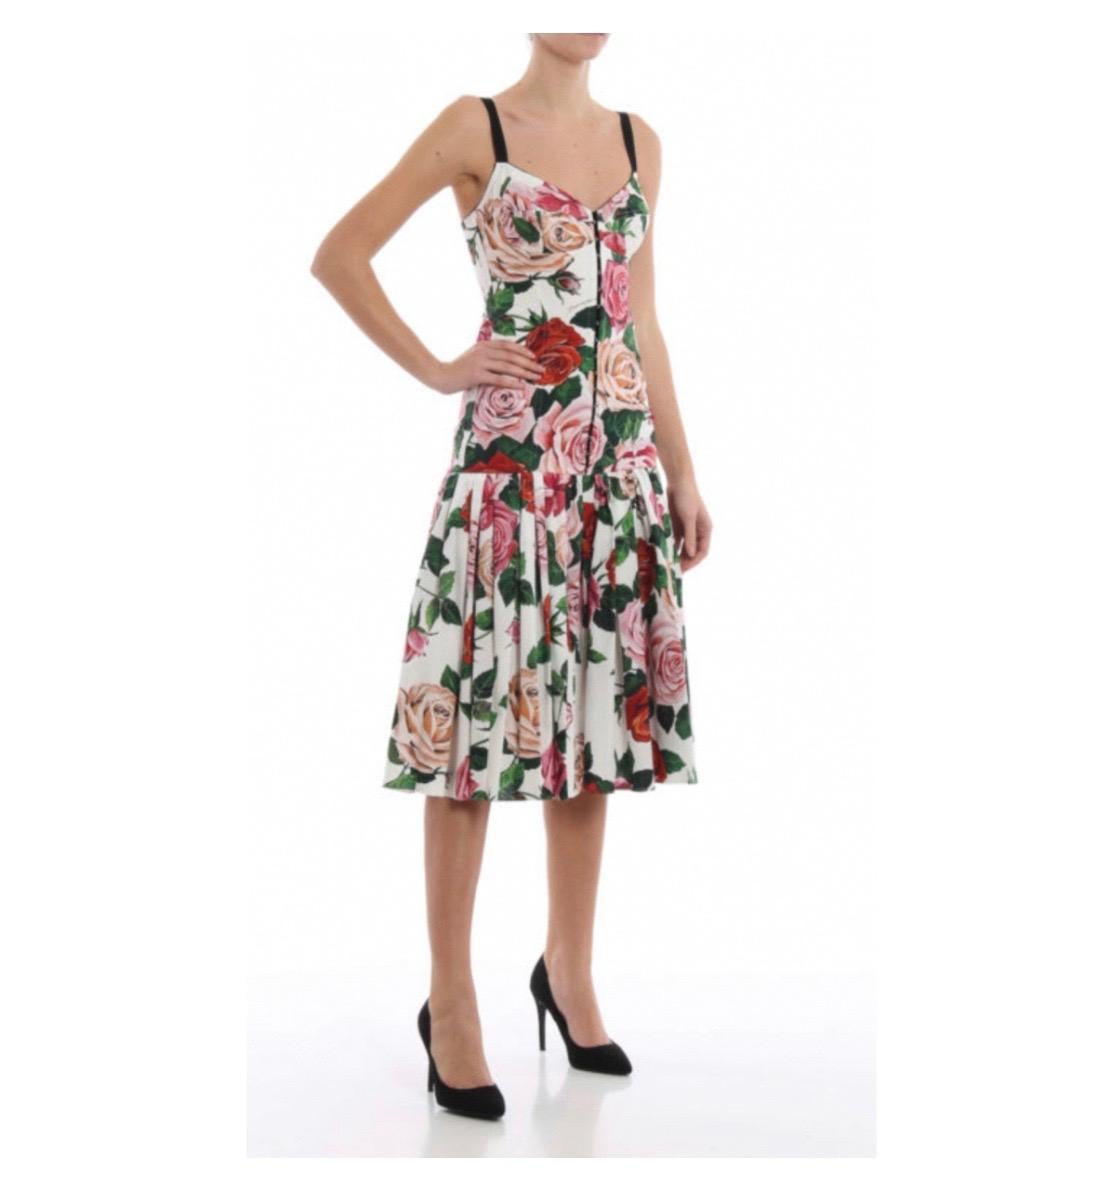  Dolce & Gabbana dress made from
flower printed stretch cotton poplin,
this corset dress is detailed with
elasticated shoulder straps and back,
front decorative hooks-and-eye and
rear zip fastening, low waist and wide
pleated skirt.

Product